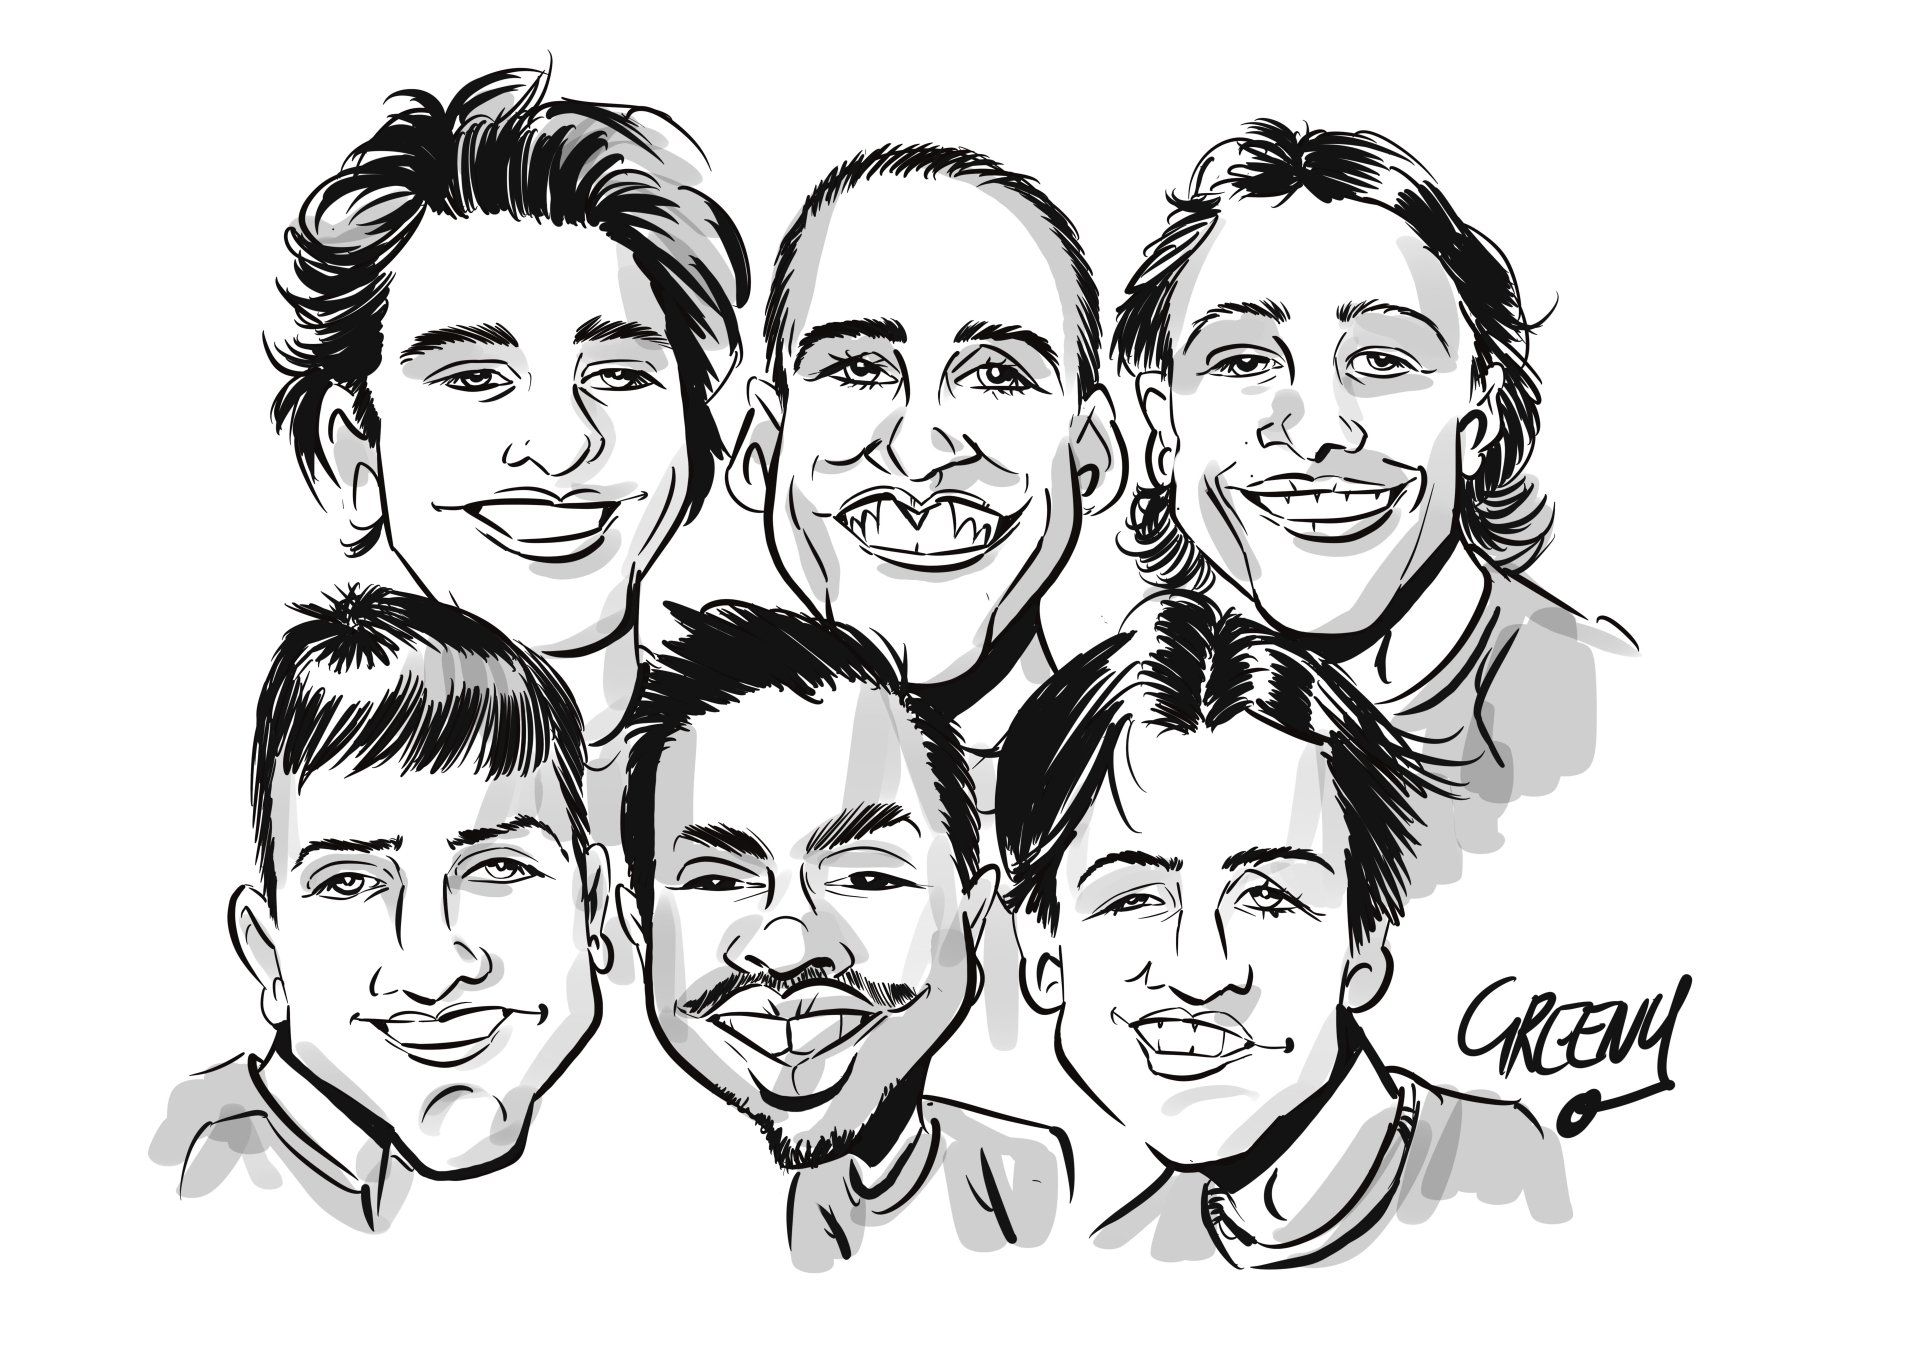 Event hire cartoonist  drawing live caricatures at events from trade events to office parties and weddings David Green